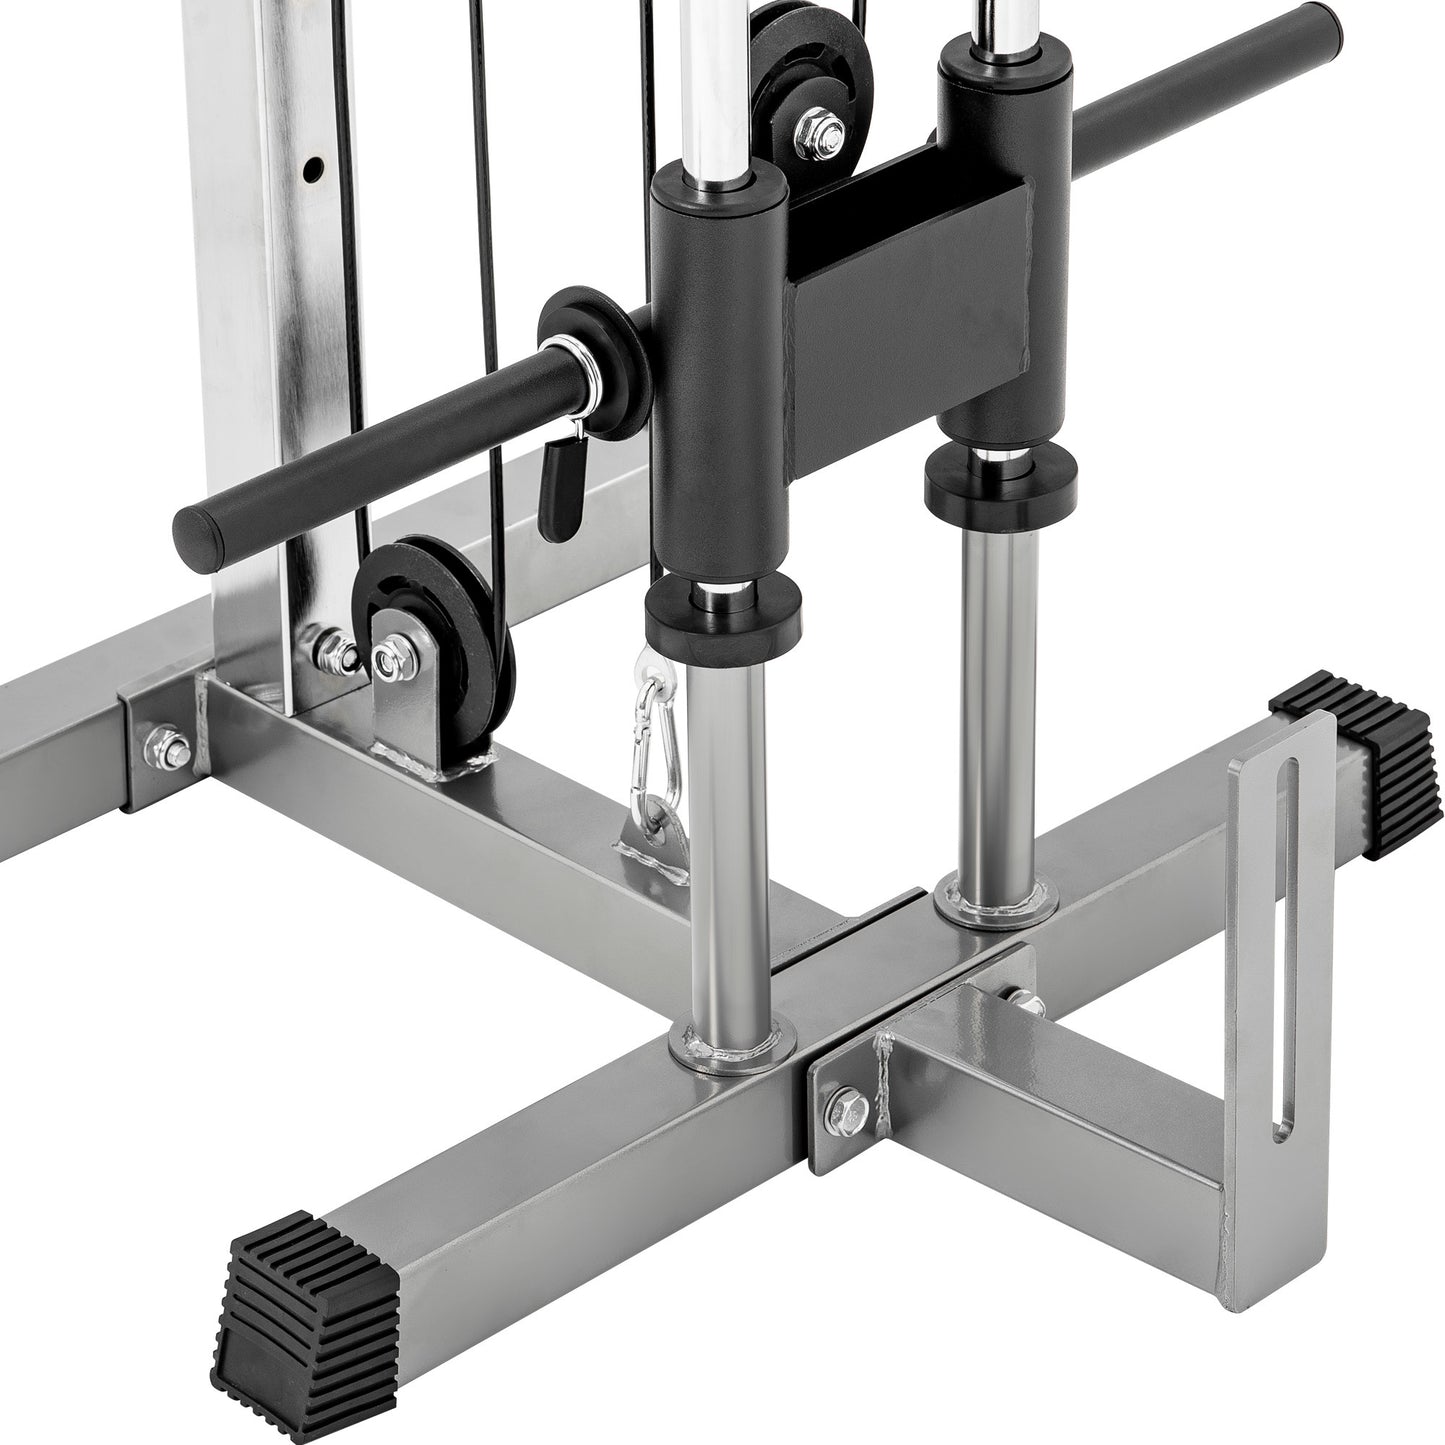 Lat Pulldown Machine Home Gym Fitness Silver